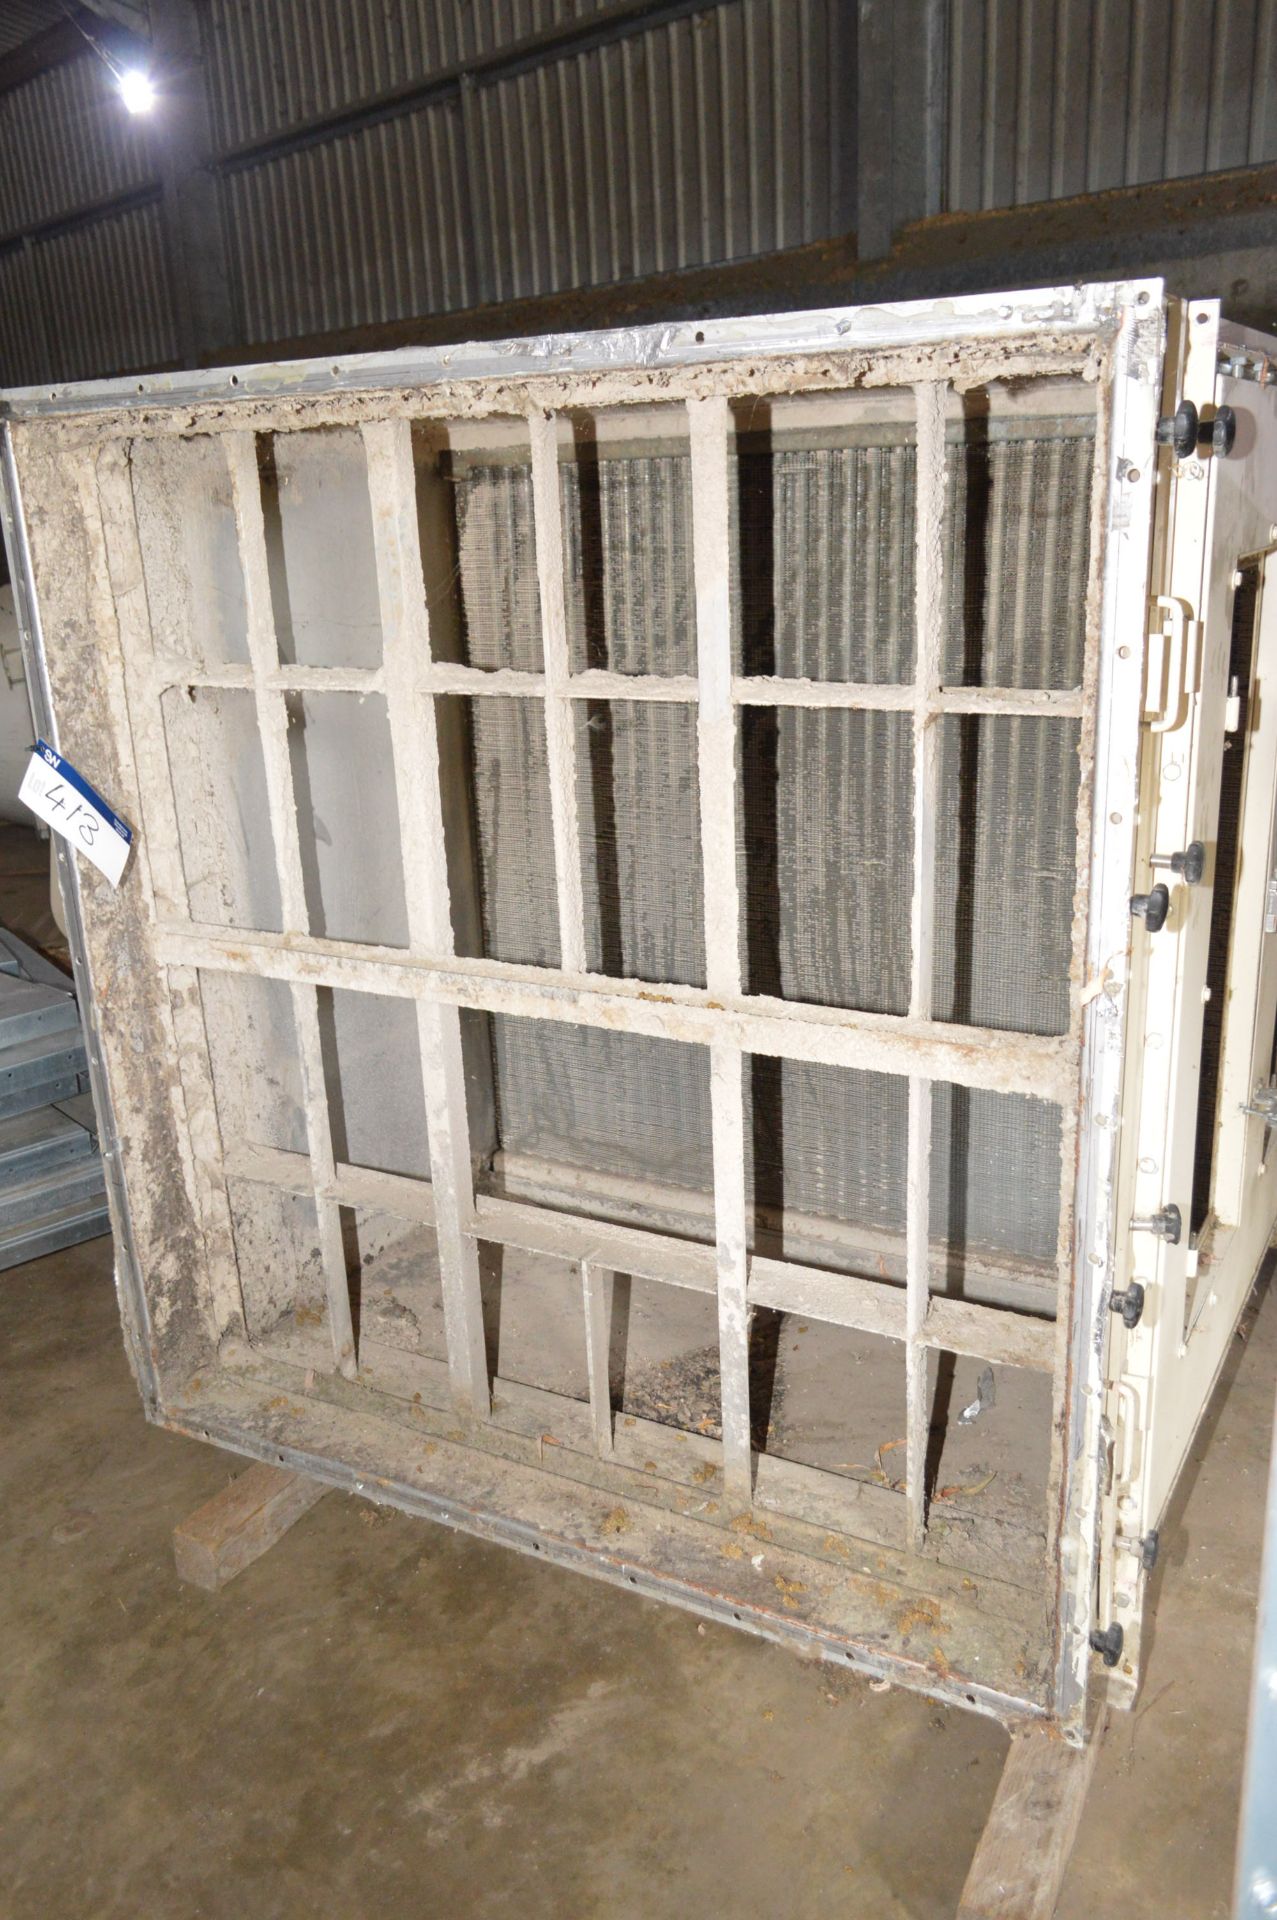 MAINLY STAINLESS STEEL-CASED HEAT EXCHANGE UNIT, approx. 1.4m x 1.5m x 2m long overall